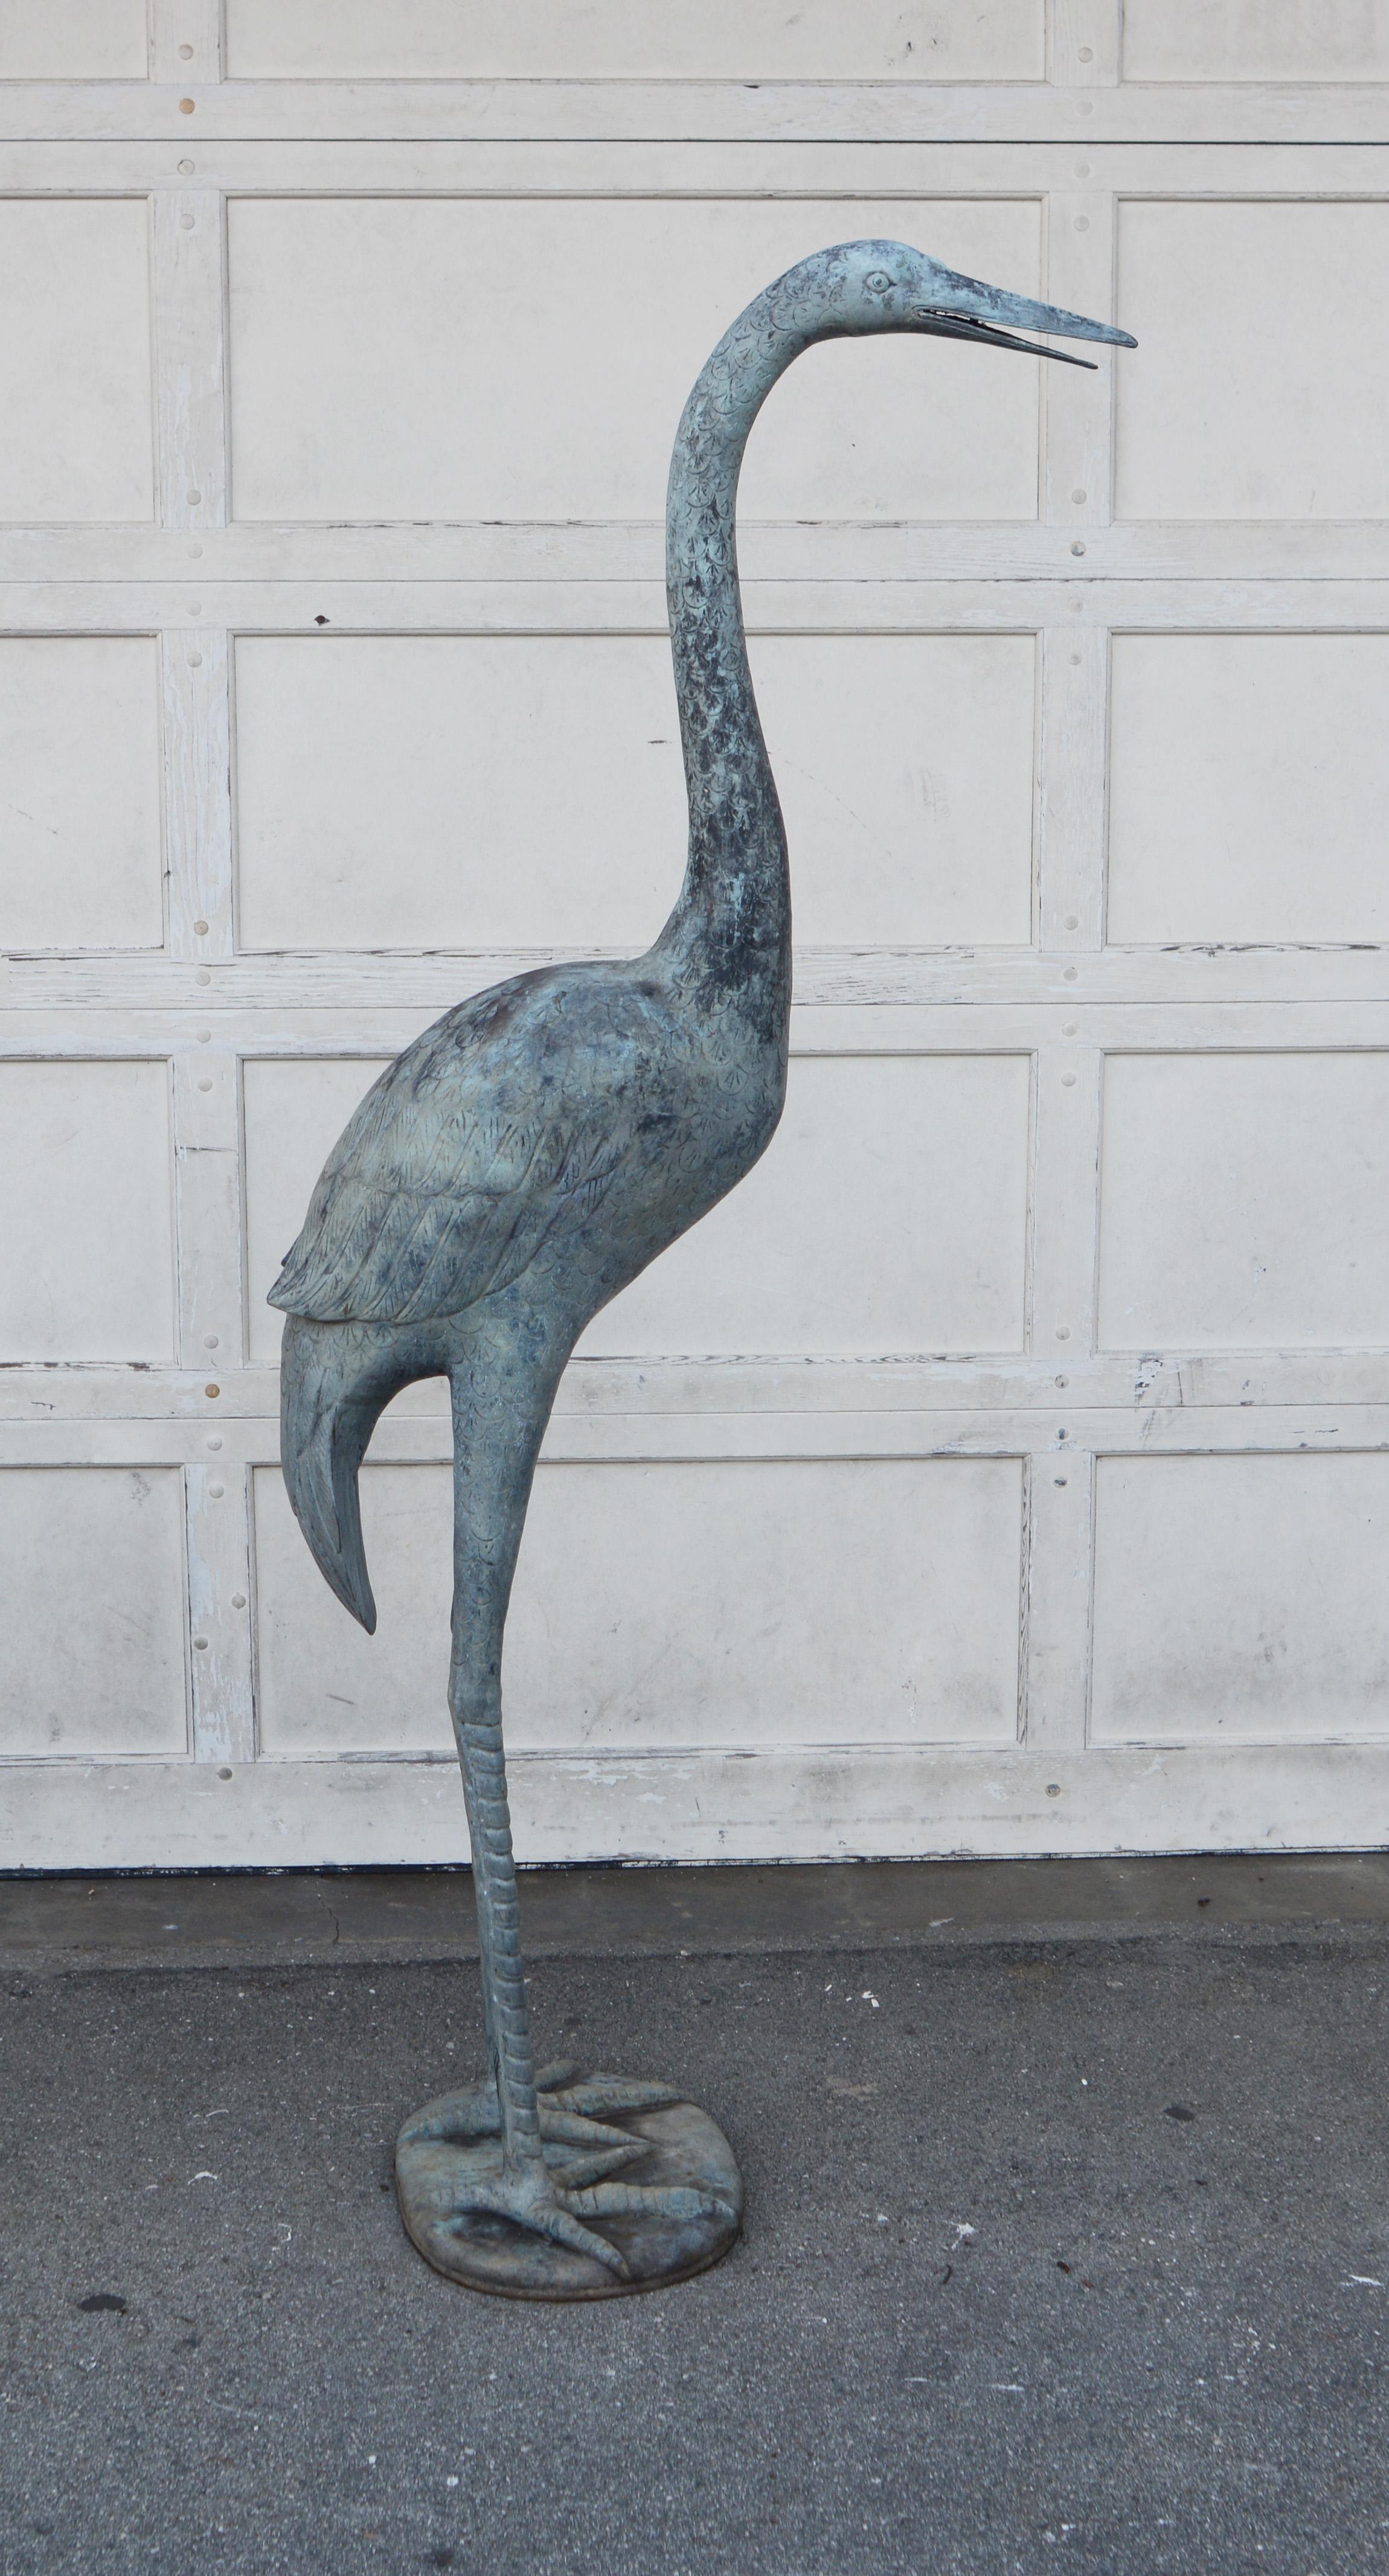 Vintage large size bronze crane. This crane has been outdoors but could be used inside as well. The verdigris patina shows some wear and discoloration. There are a few spots of deck stain on it.